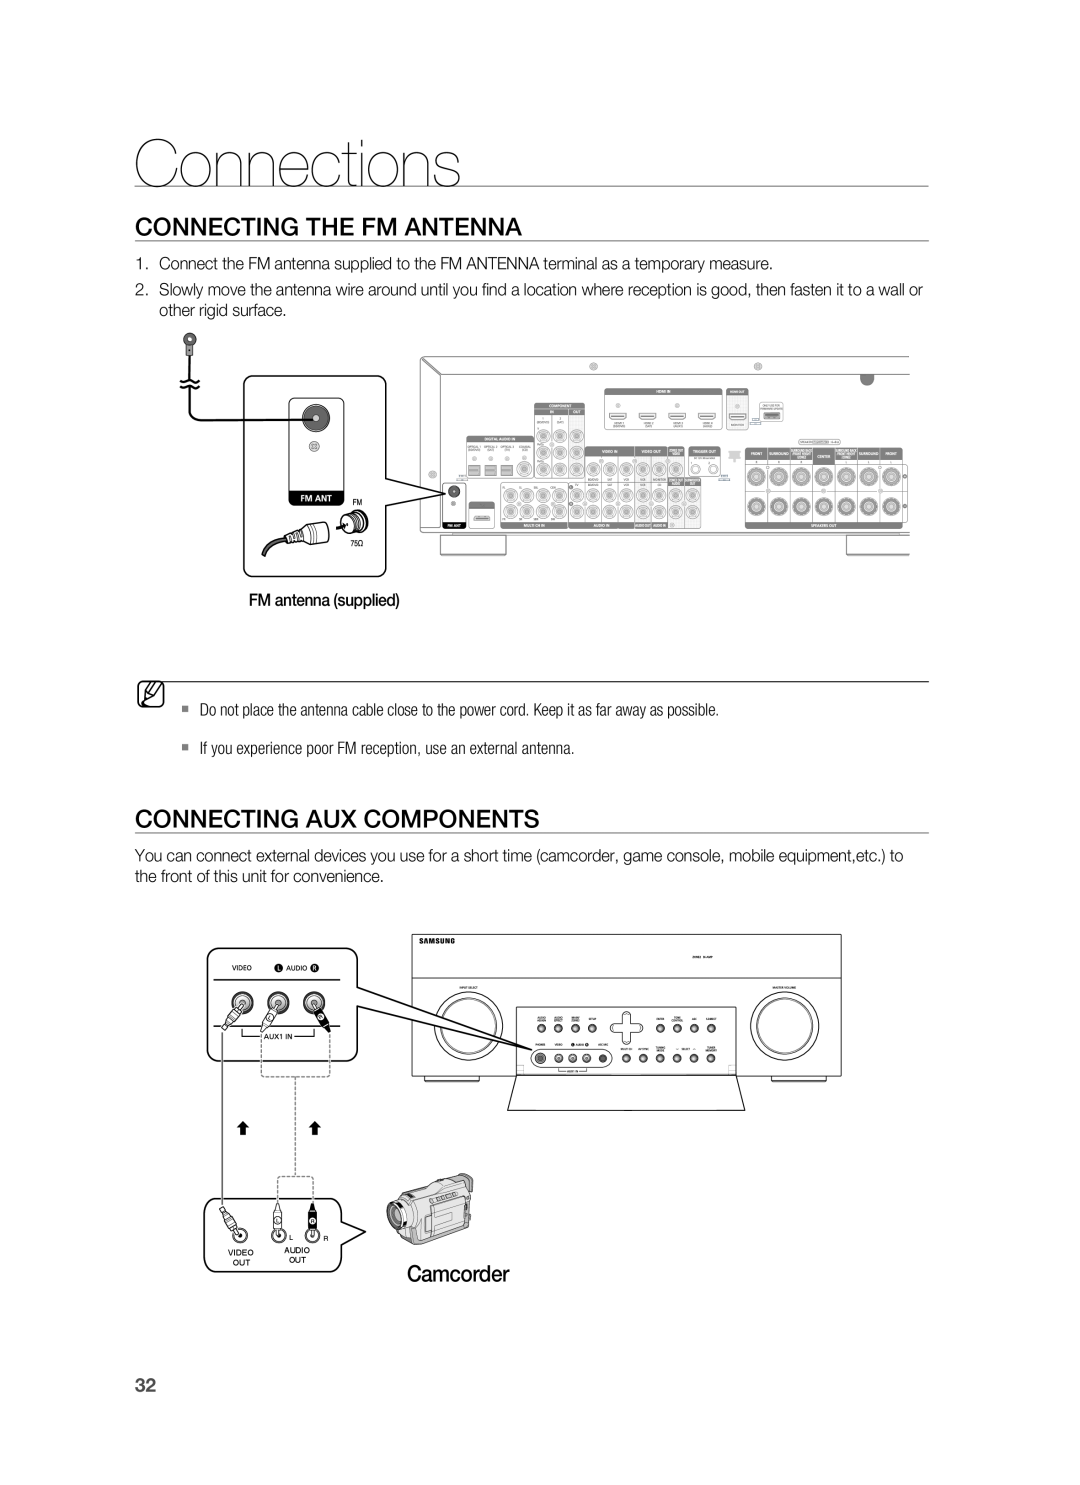 Samsung HW-C900-XAA user manual Connections, Connecting The Fm Antenna, Connecting Aux Components, Camcorder 